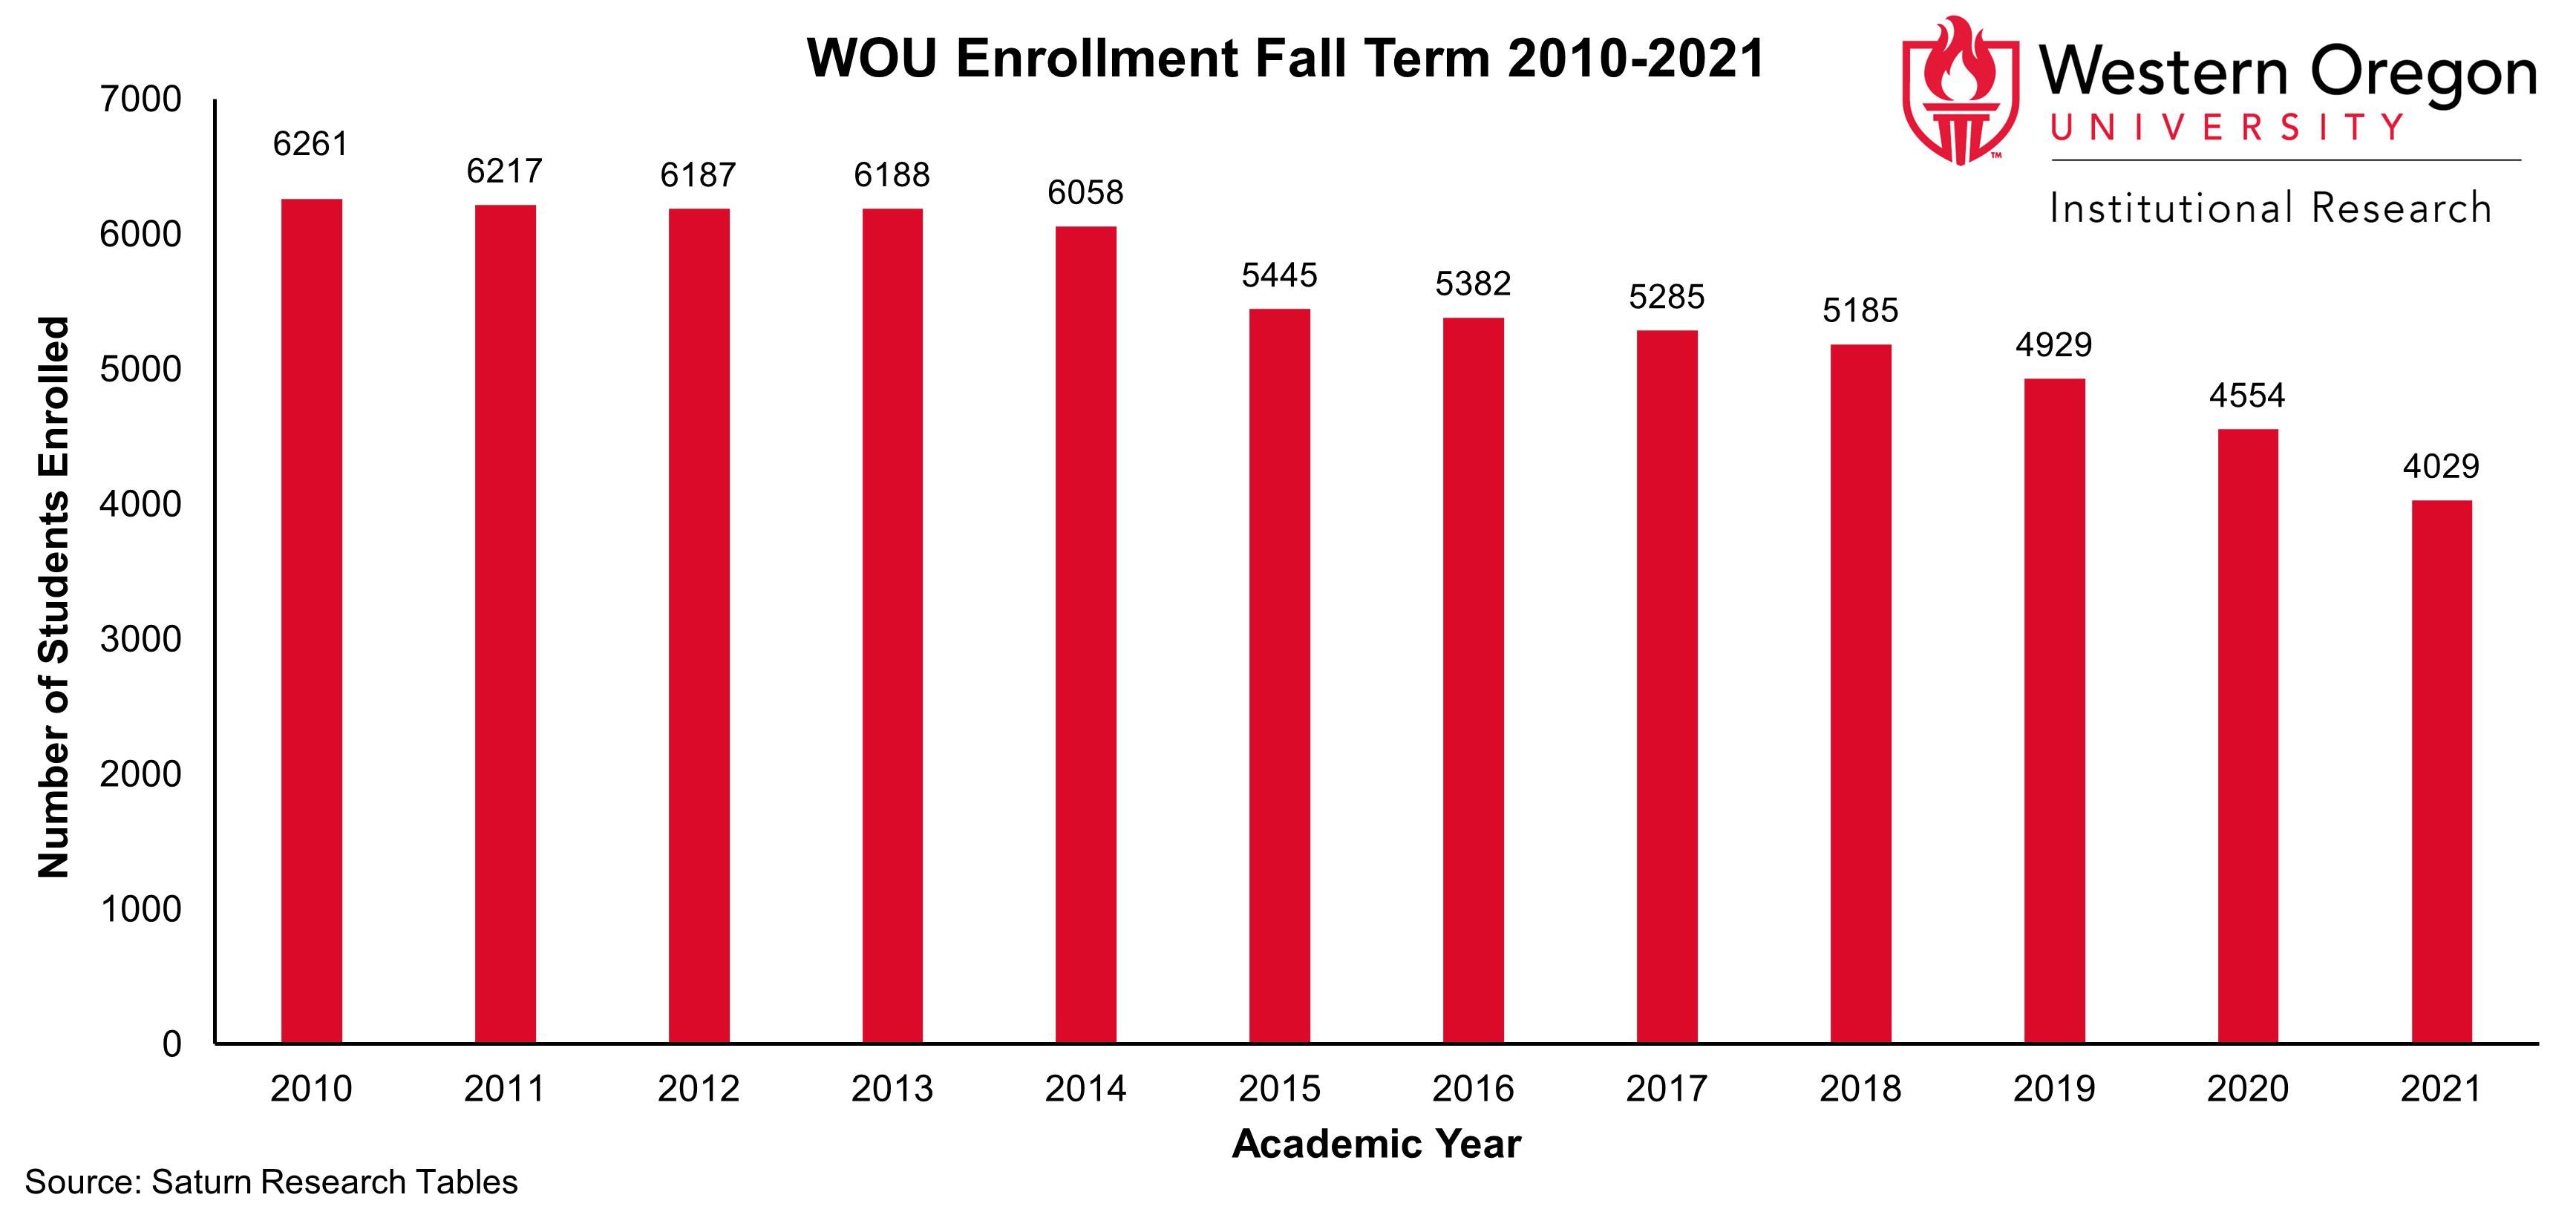 Bar graph of Fall enrollment counts since Fall 2010 for WOU students, showing that enrollment has been steadily declining since Fall 2010.